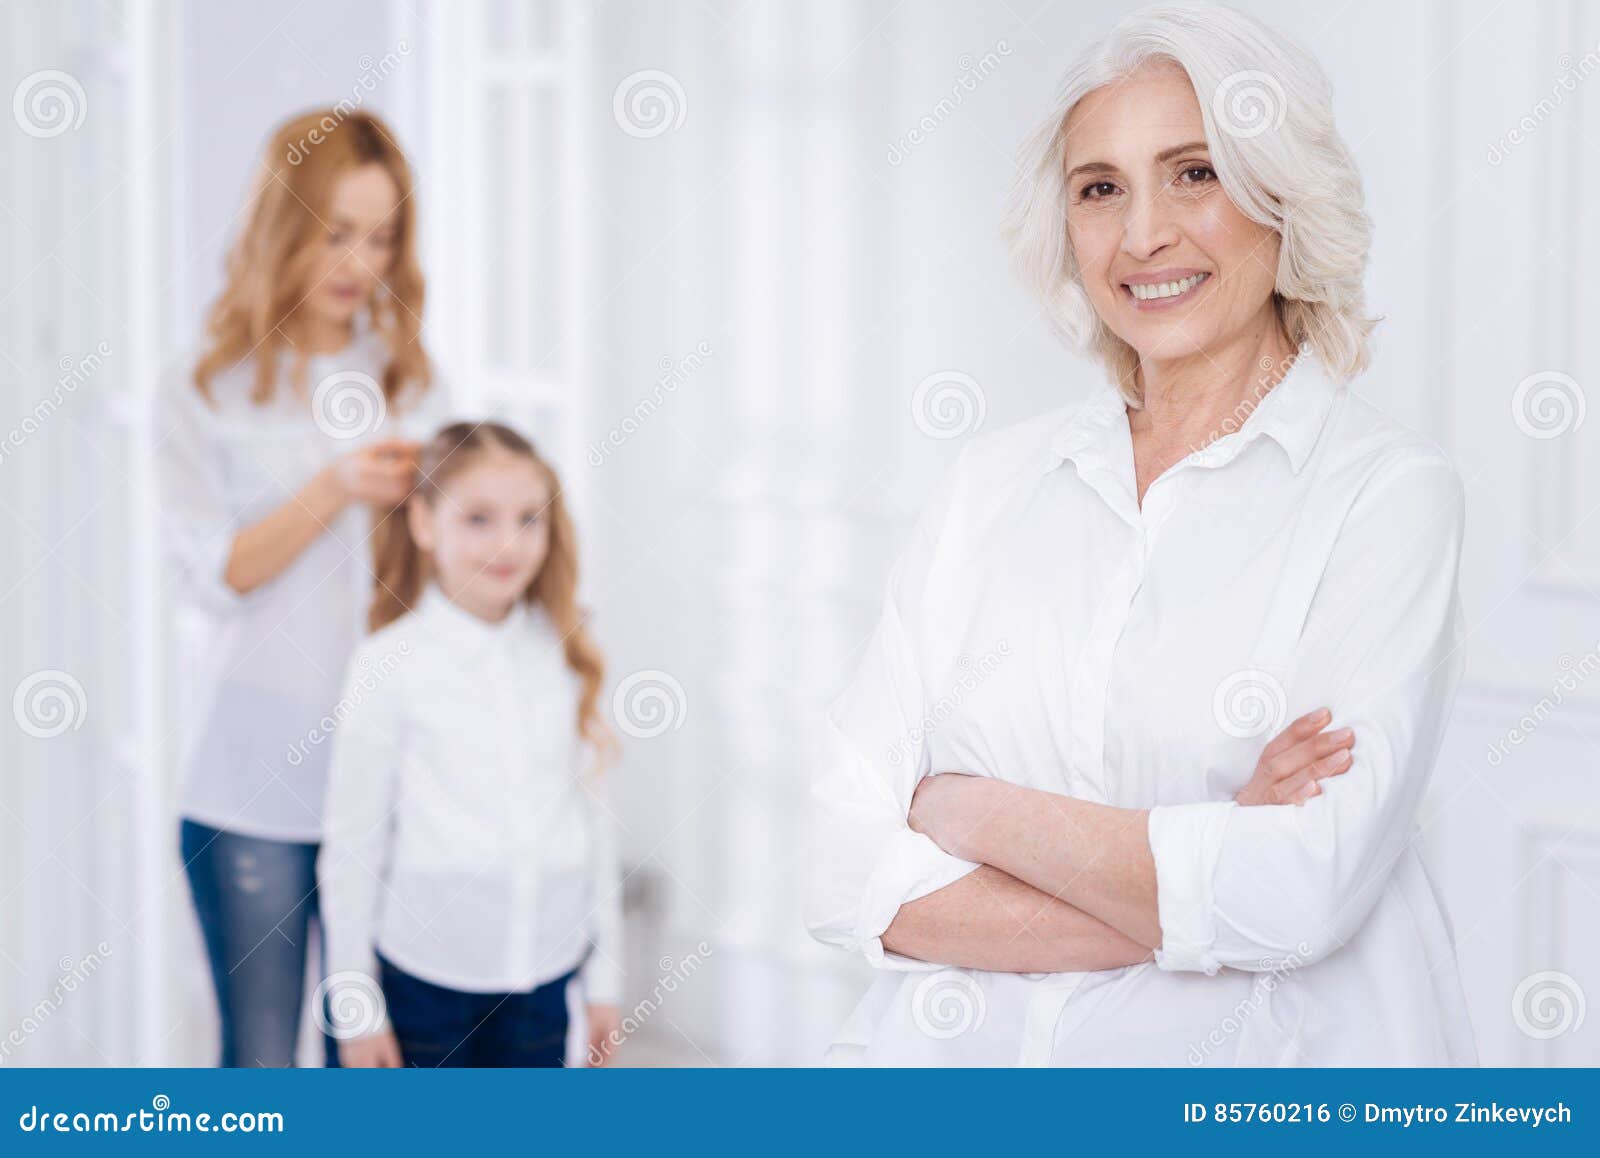 pleasant cheerful senior woman resting with her family at home